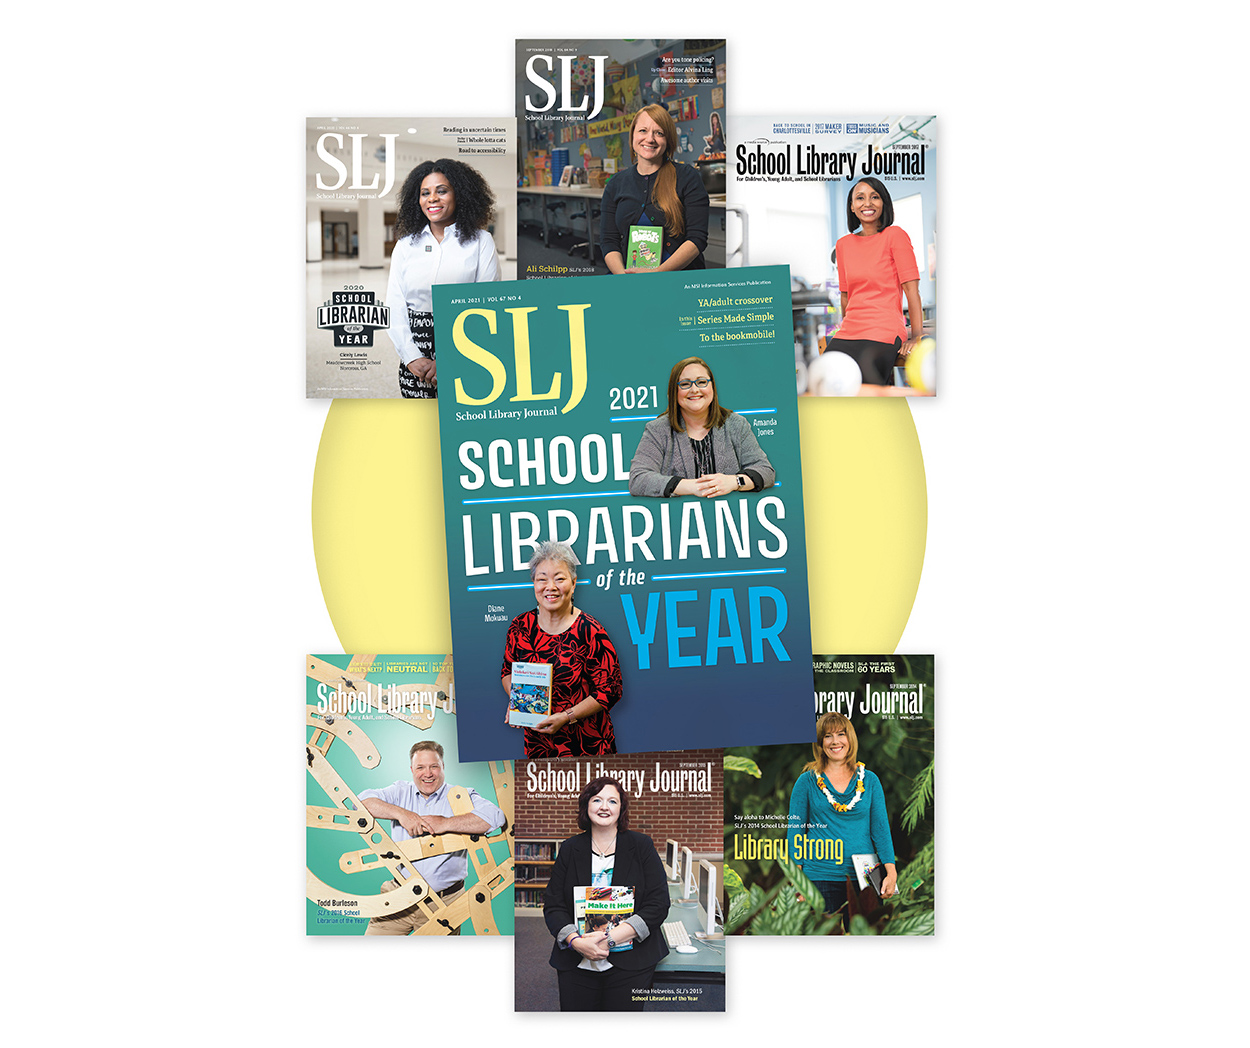 School Librarian of the Year covers